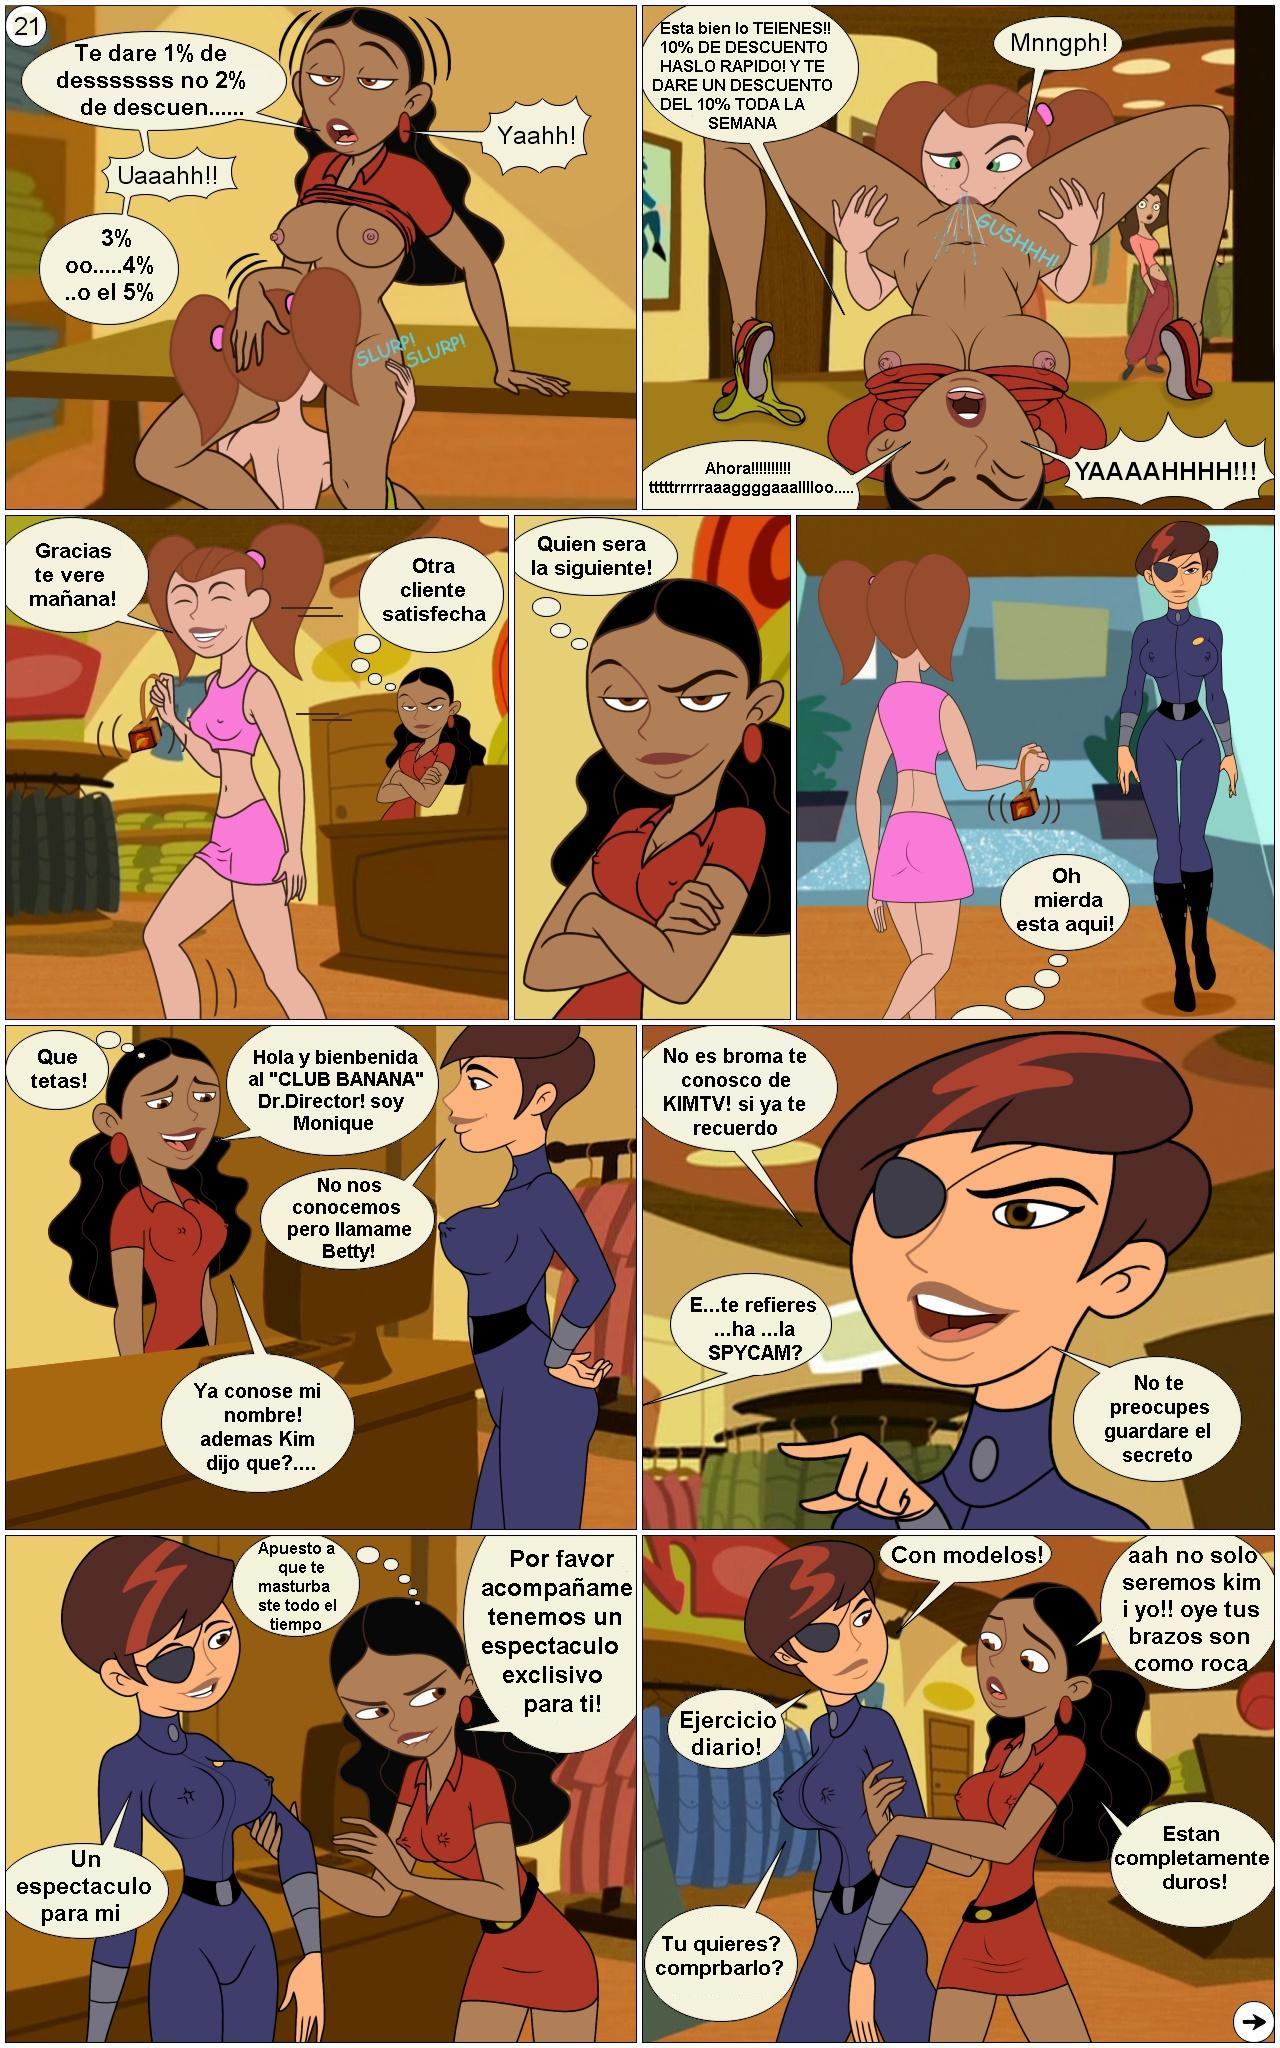 [Gagala] Oh, Betty! - Or: How to Seduce a Female Secret Agent (Kim Possible) [Spanish] 